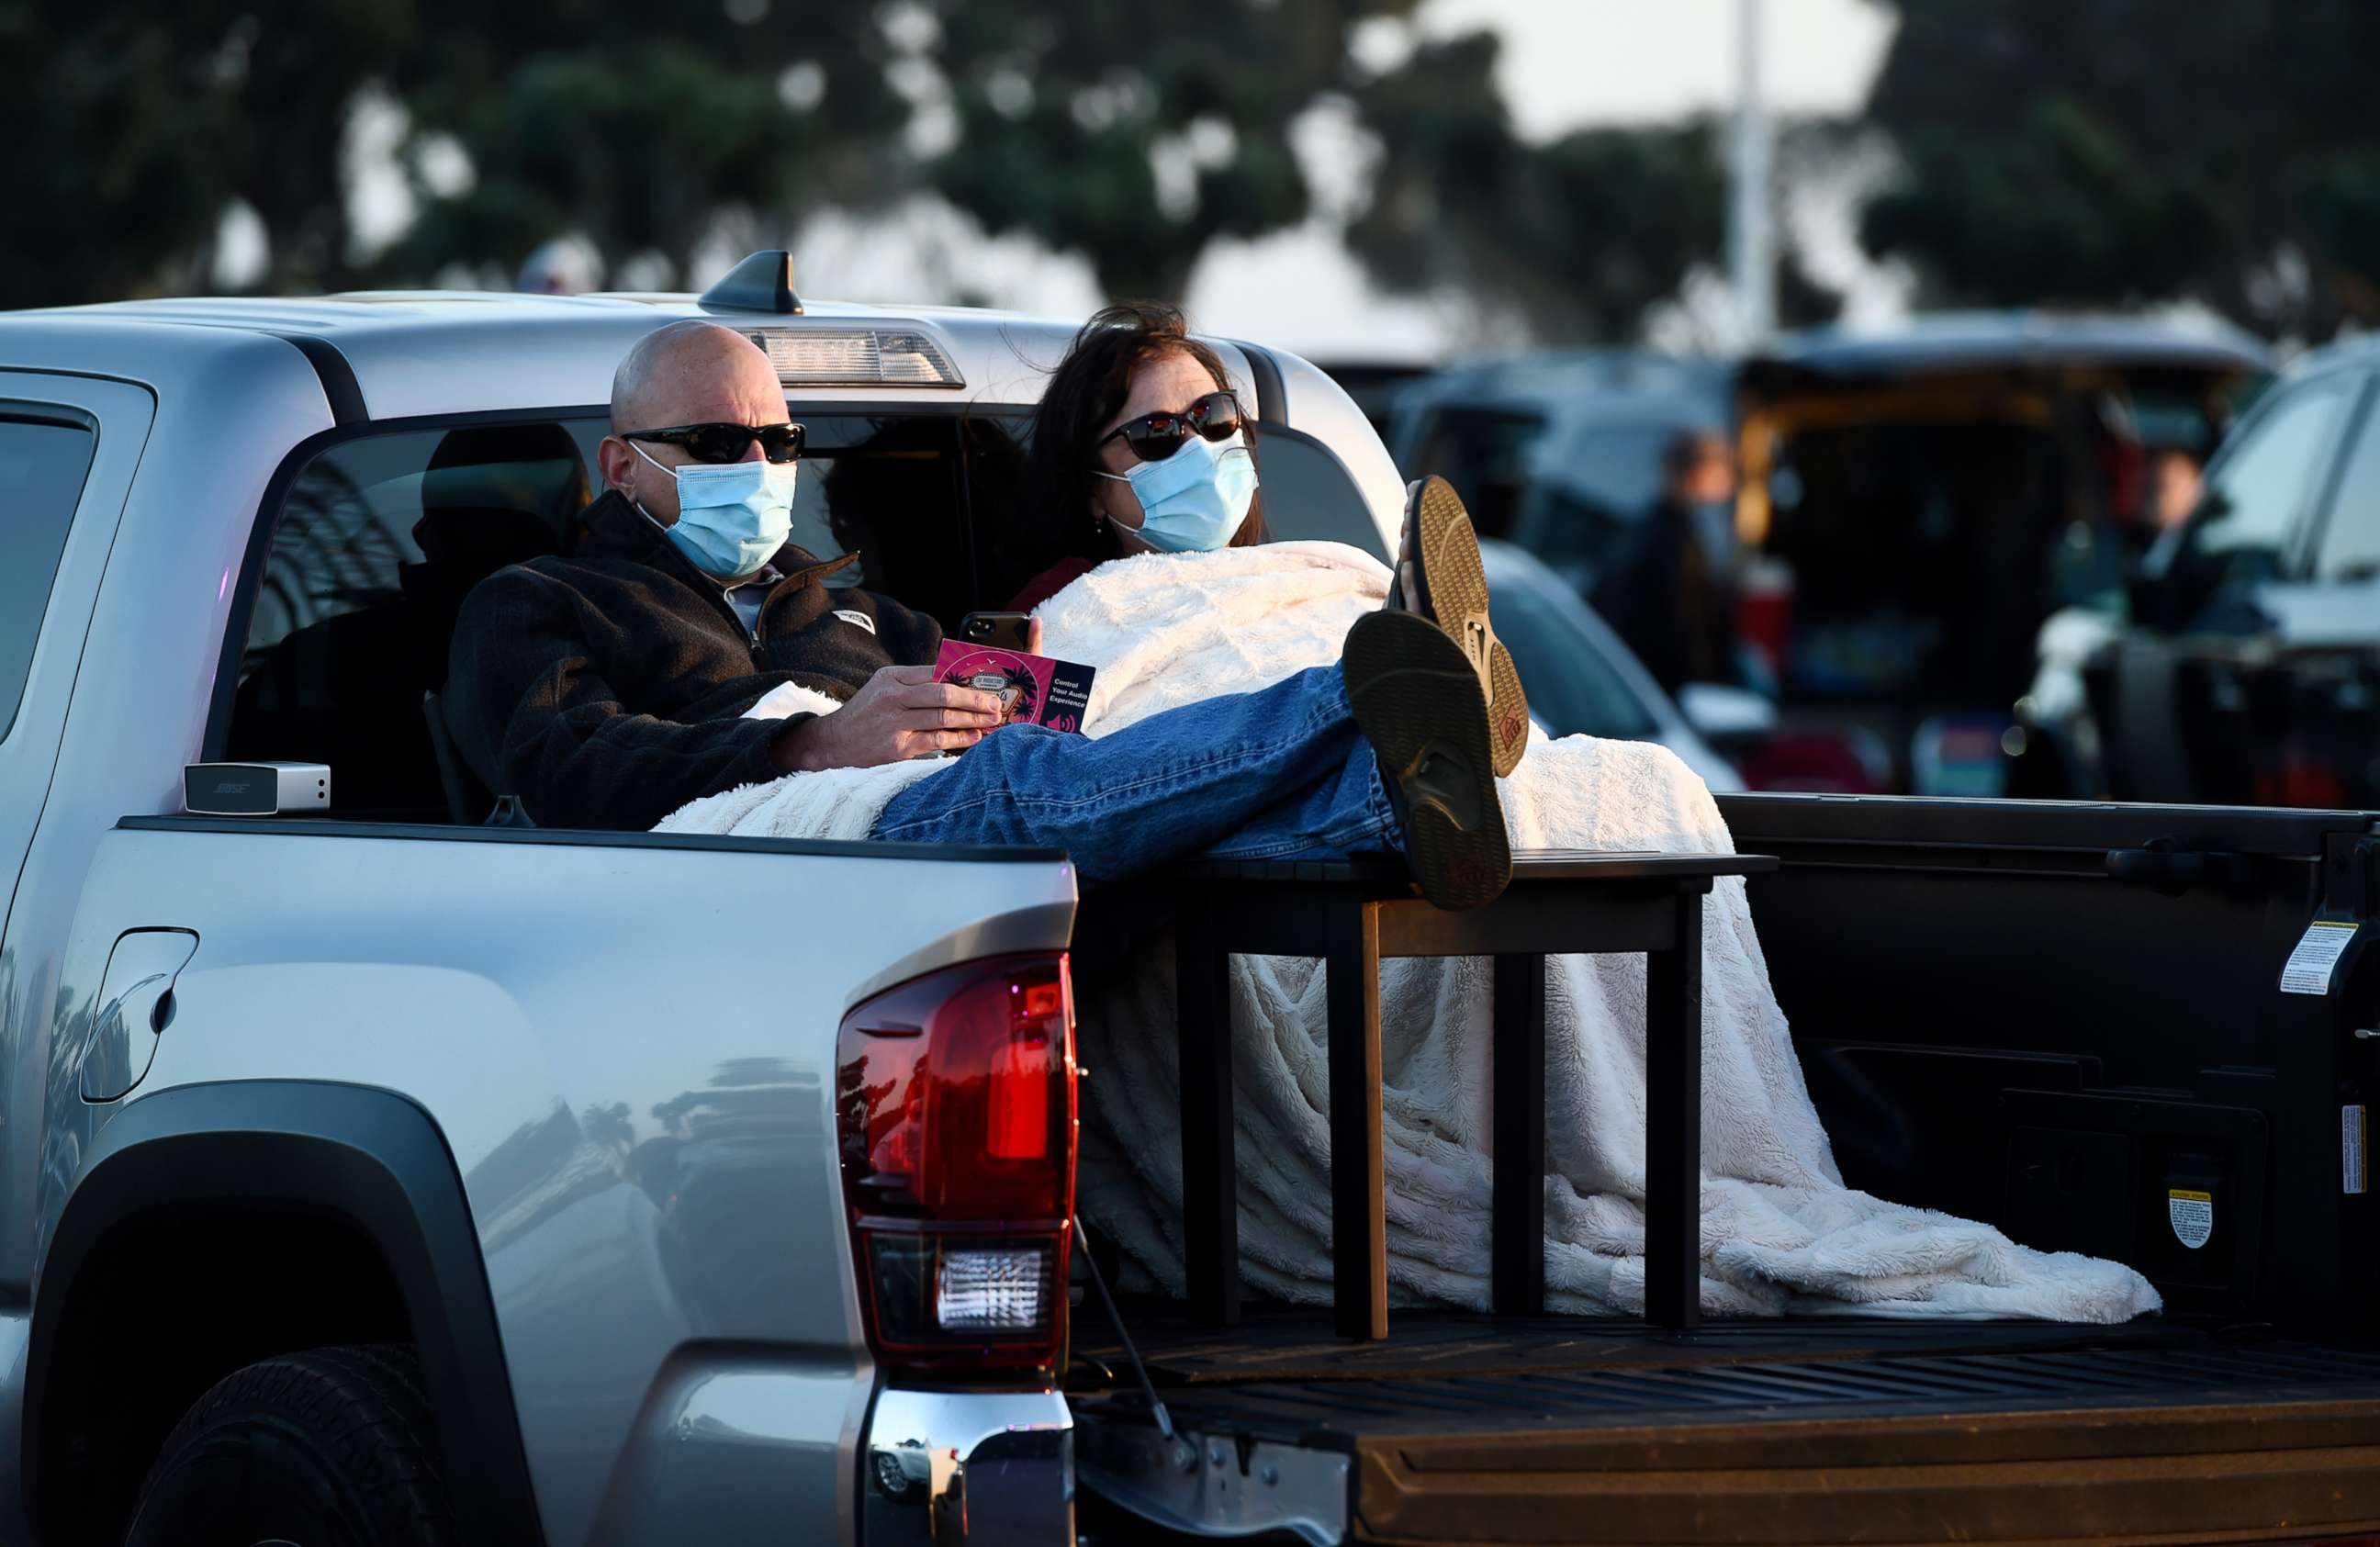 PHOTO: Chris Cdebaca of Oxnard, Calif. and his wife Avonna Ramsey await the start of Third Eye Blind's performance at Concerts in your Car at the Ventura County Fairgrounds on Saturday, July 25, 2020, in Ventura, Calif.